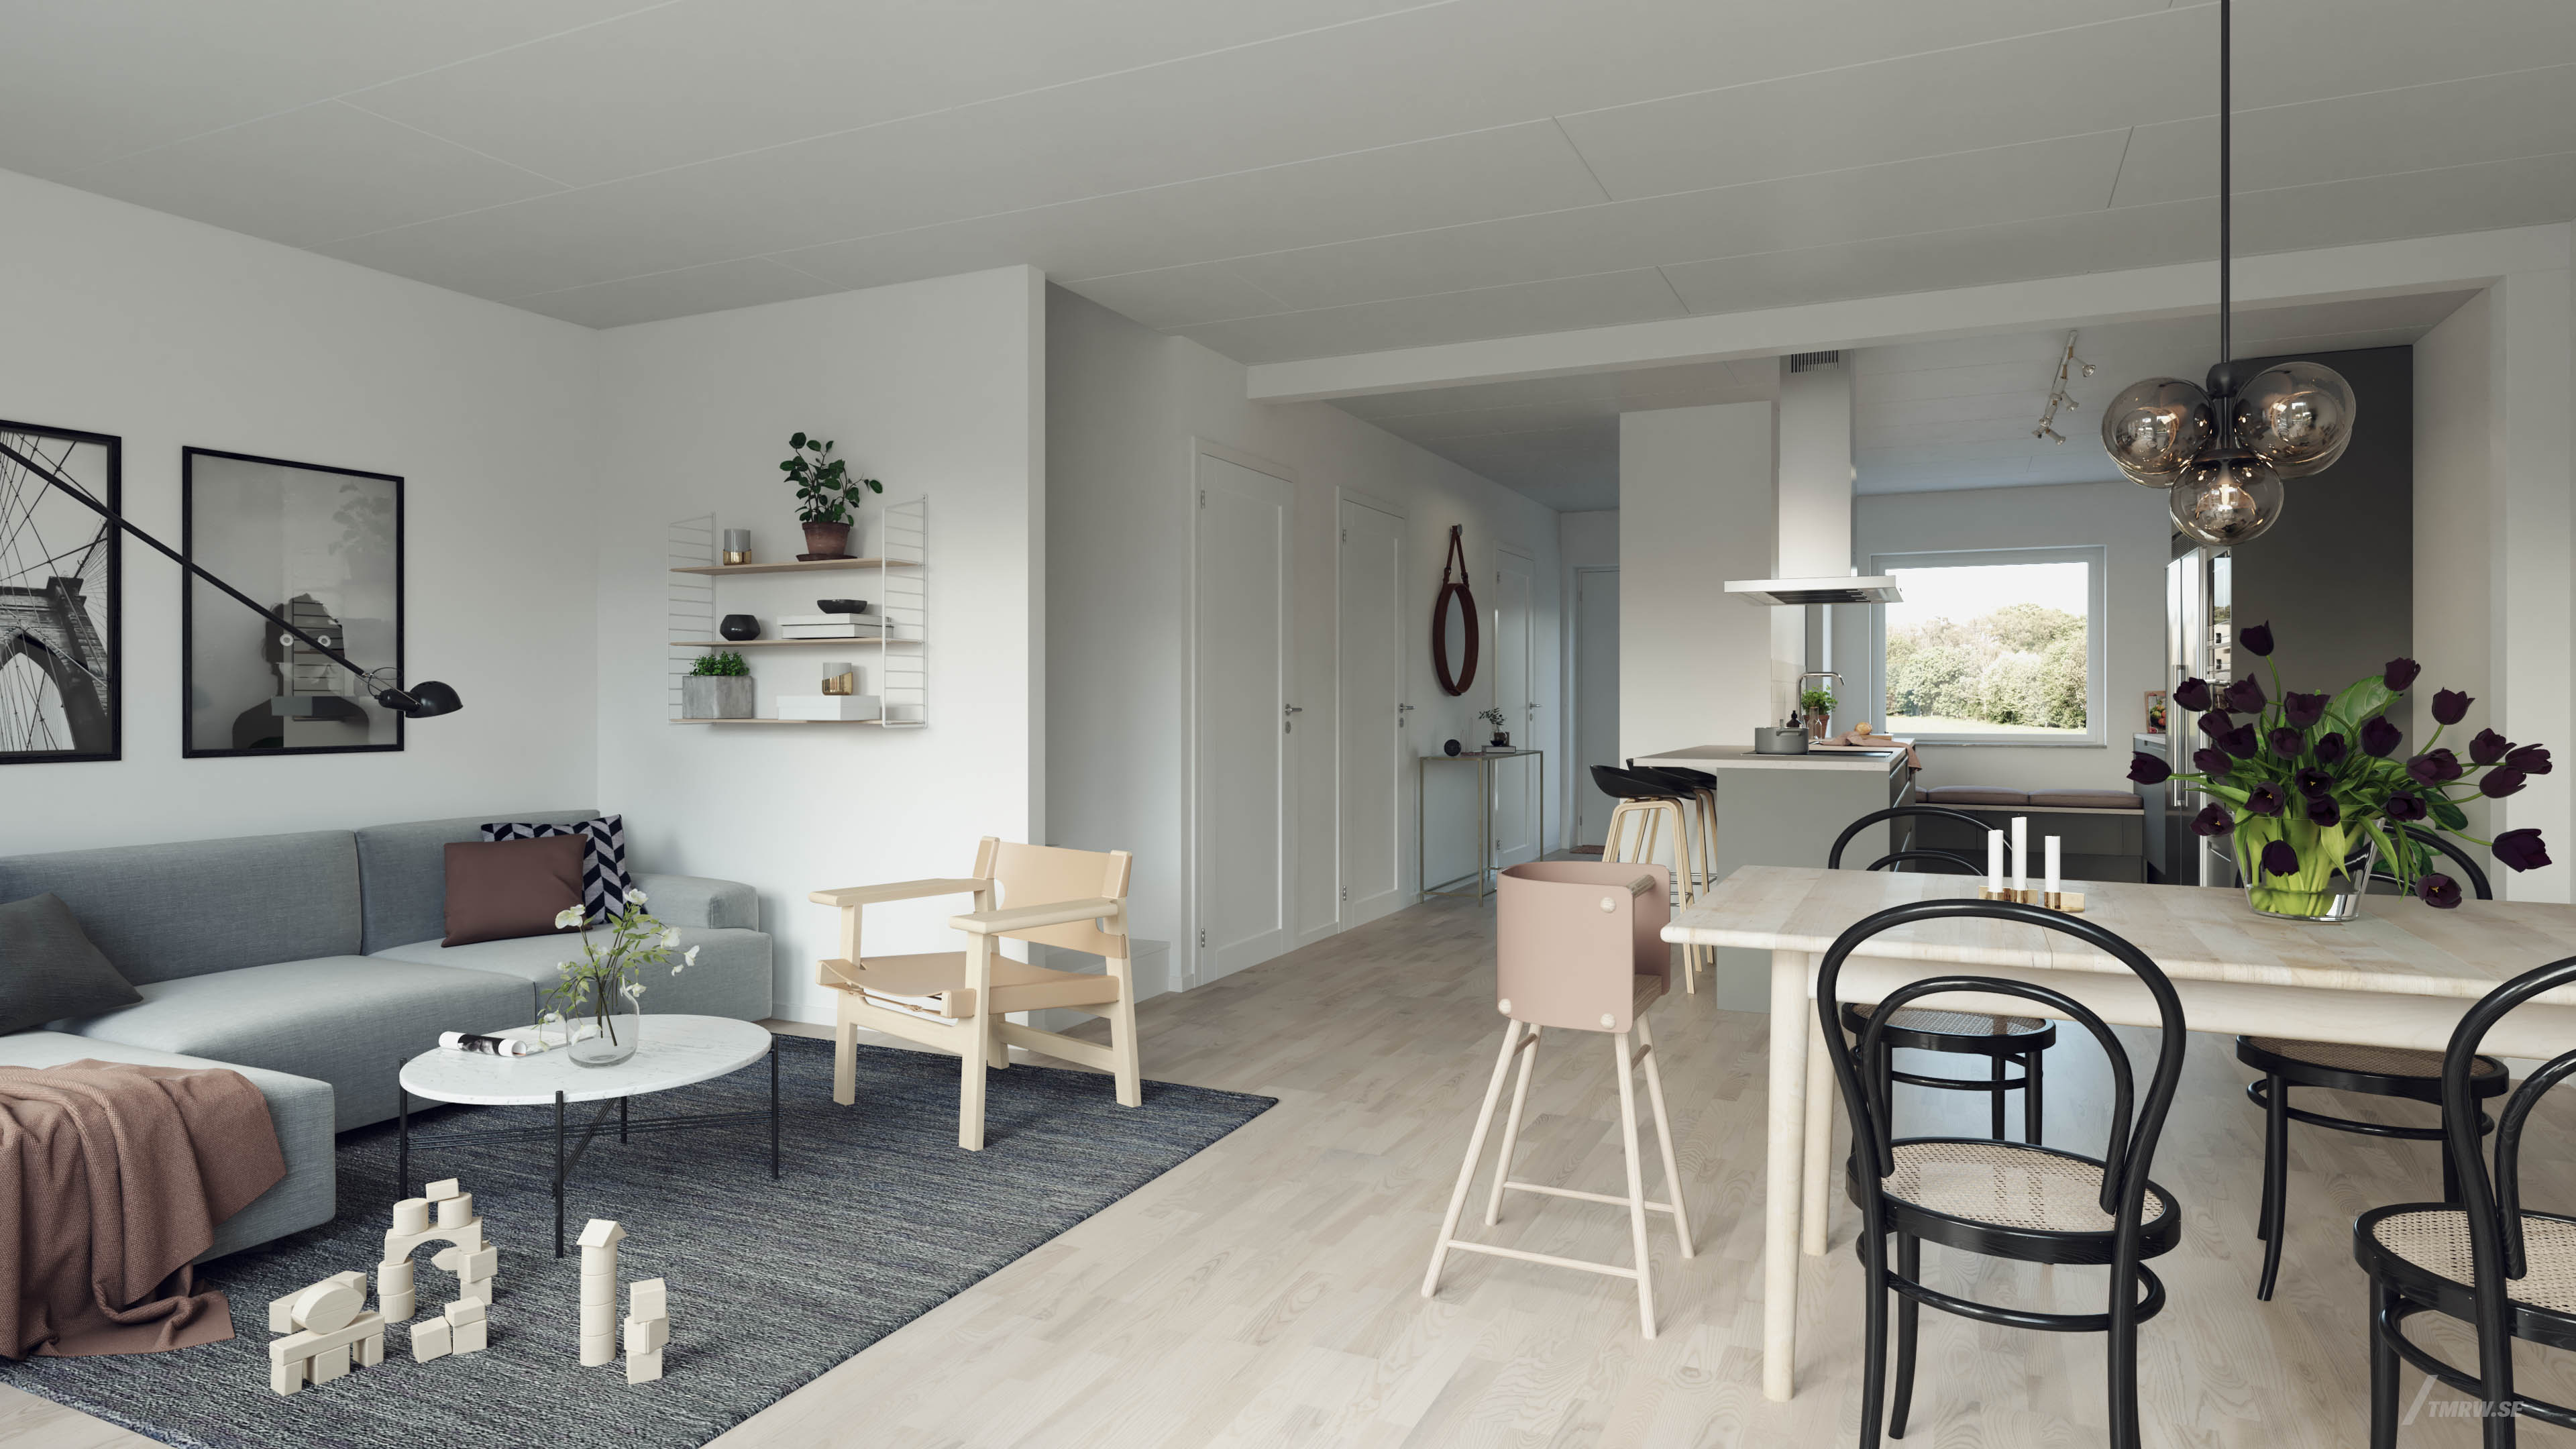 Architectural visualization of Hököpinge for Nordr an interior view showing a kitchen and livingroom from an interior view in day light.